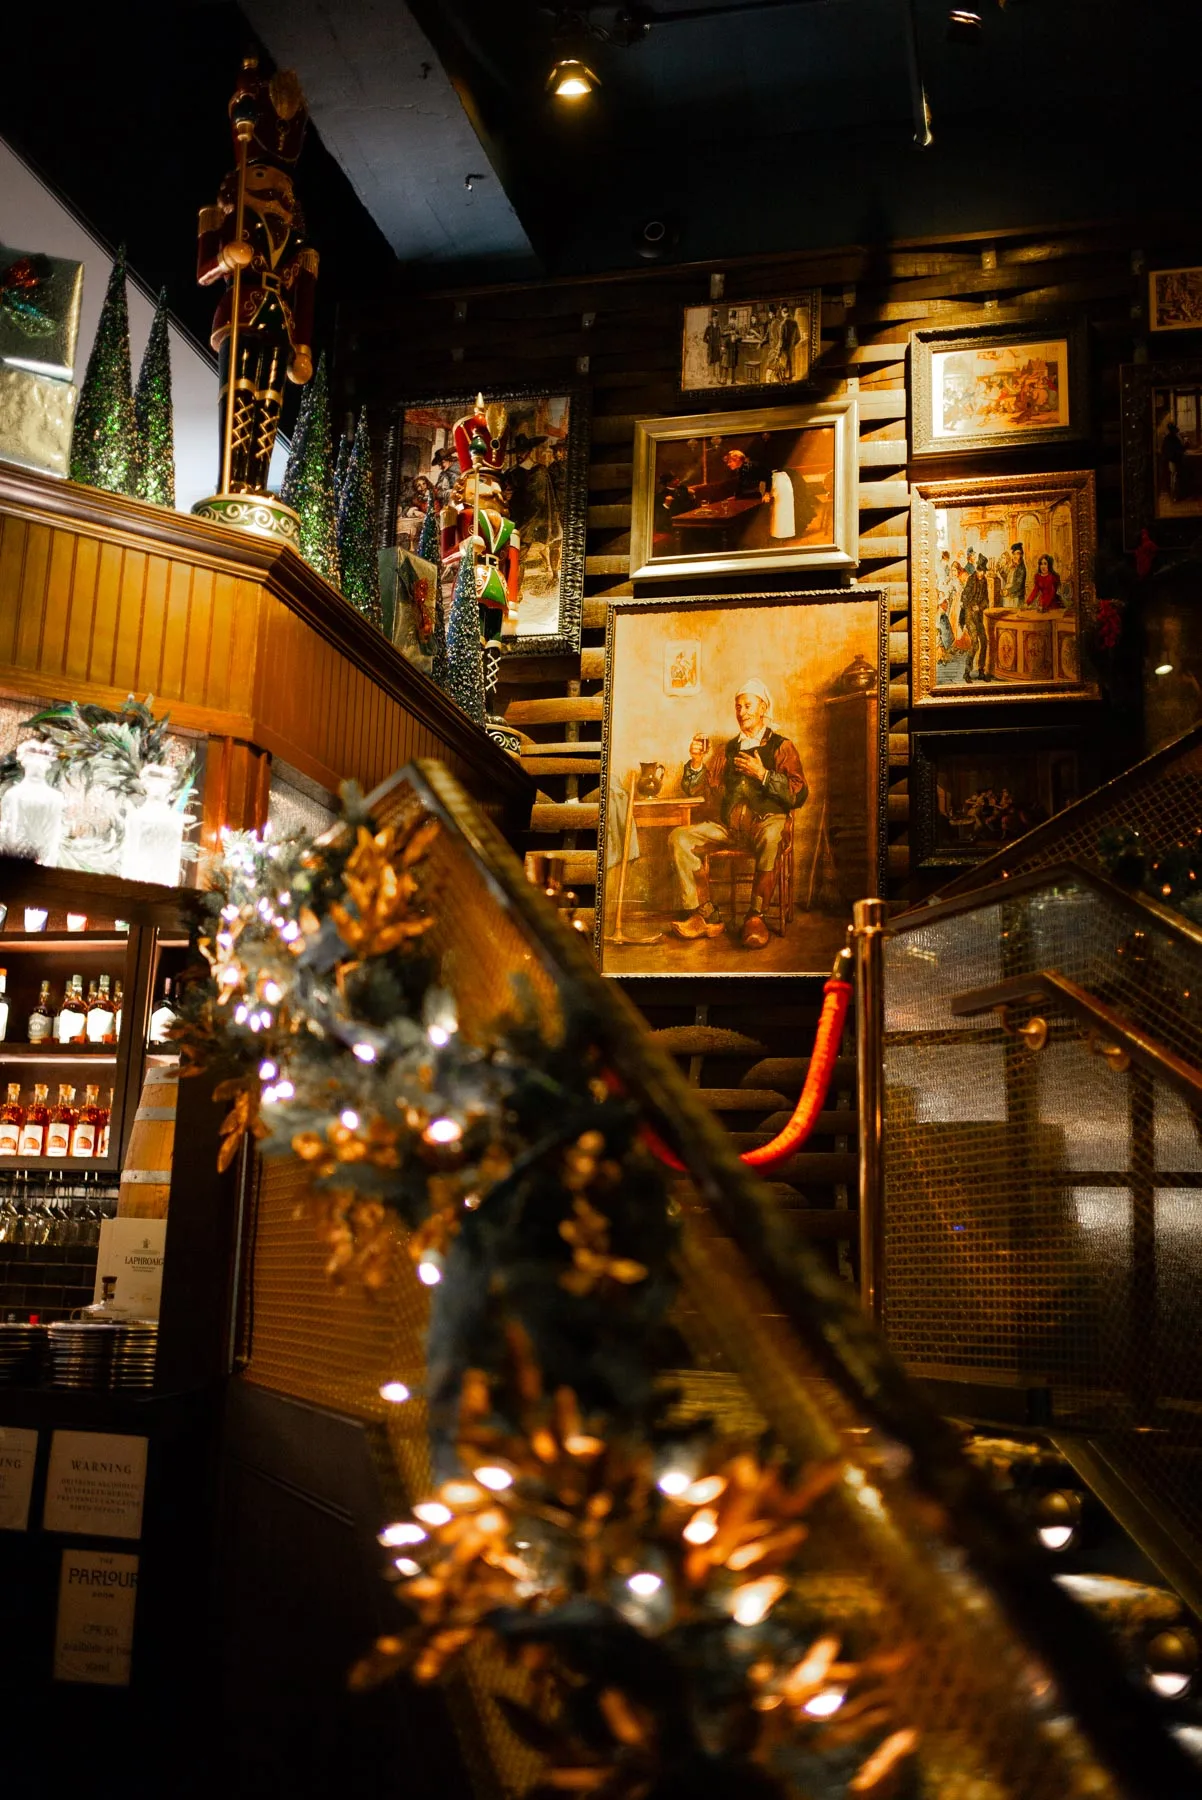 parlour room nyc, best whisky bars for scotch new york city